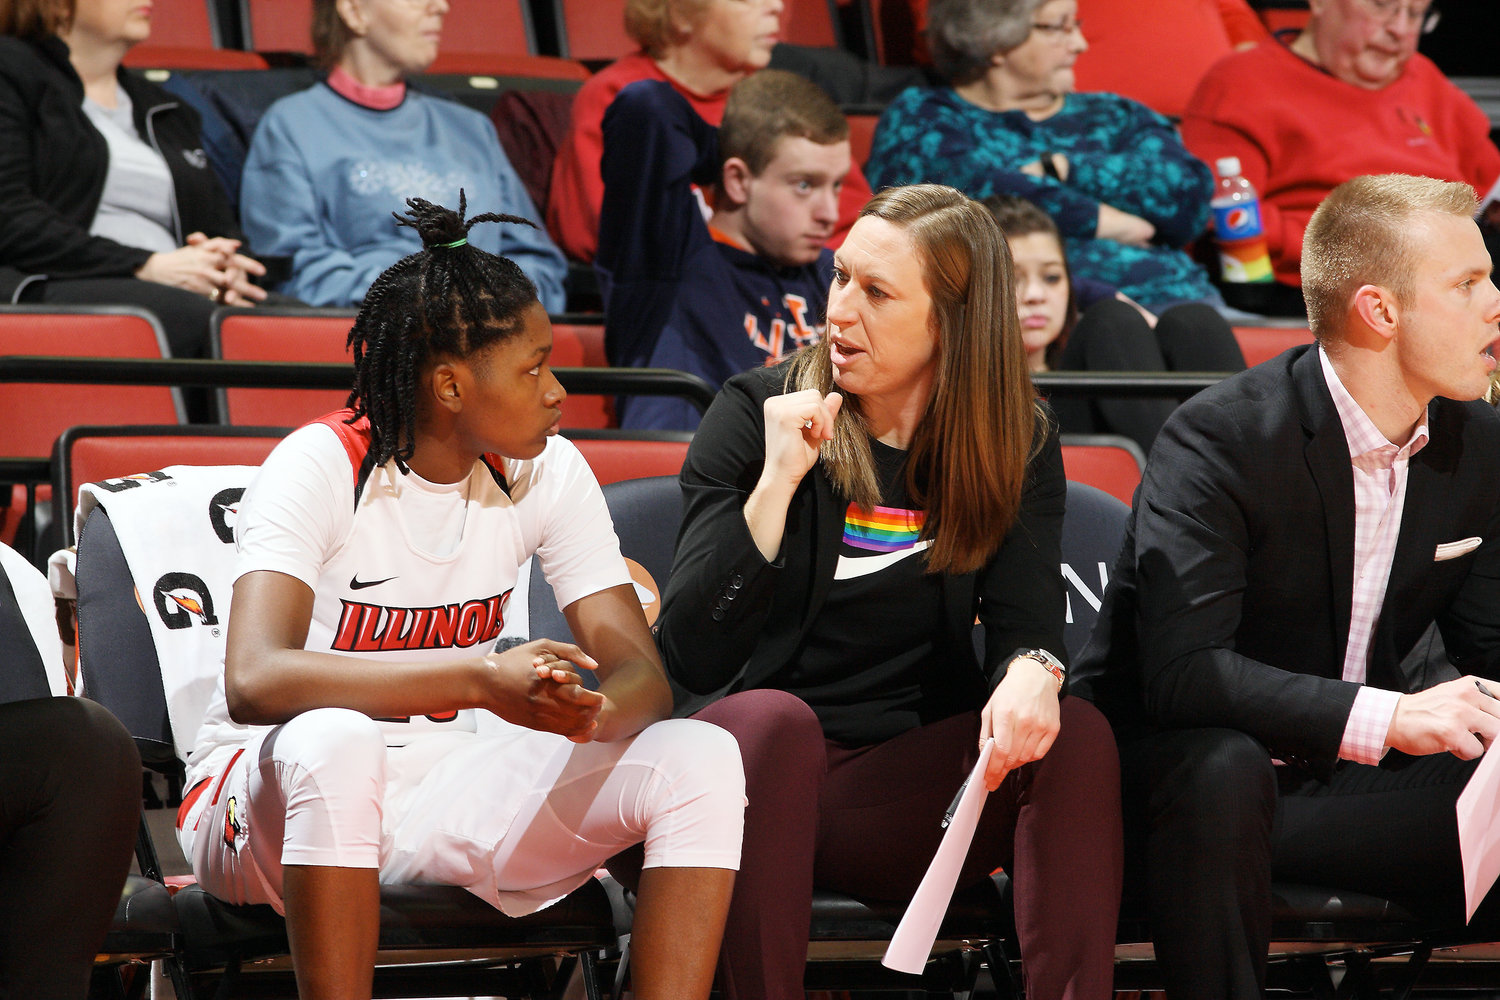 Jessica Keller (at right) is shown coaching one of Illinois State University’s (ISU) players during a game last winter in Normal, Ill. She was recently promoted to associate head coach of the ISU women’s basketball program.